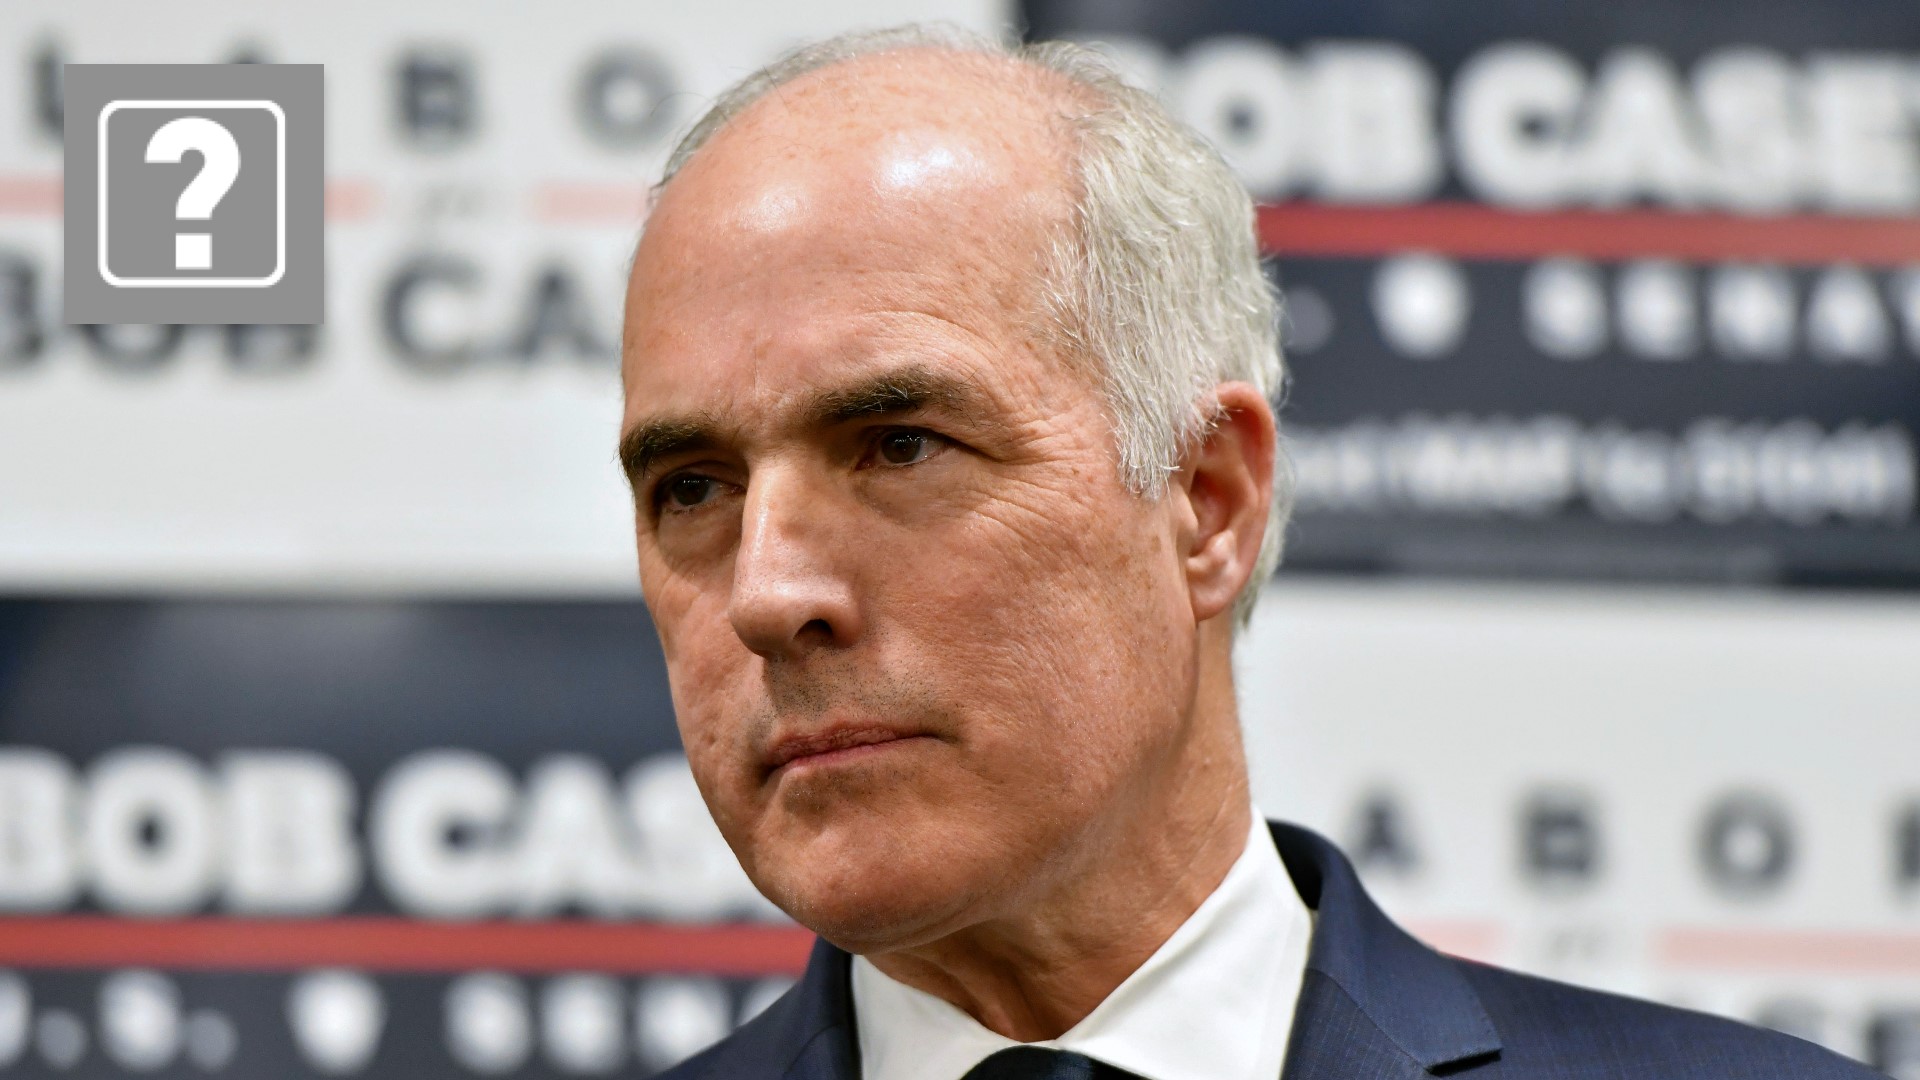 Sen. Bob Casey called out corporate "greedflation" in his latest campaign ad.